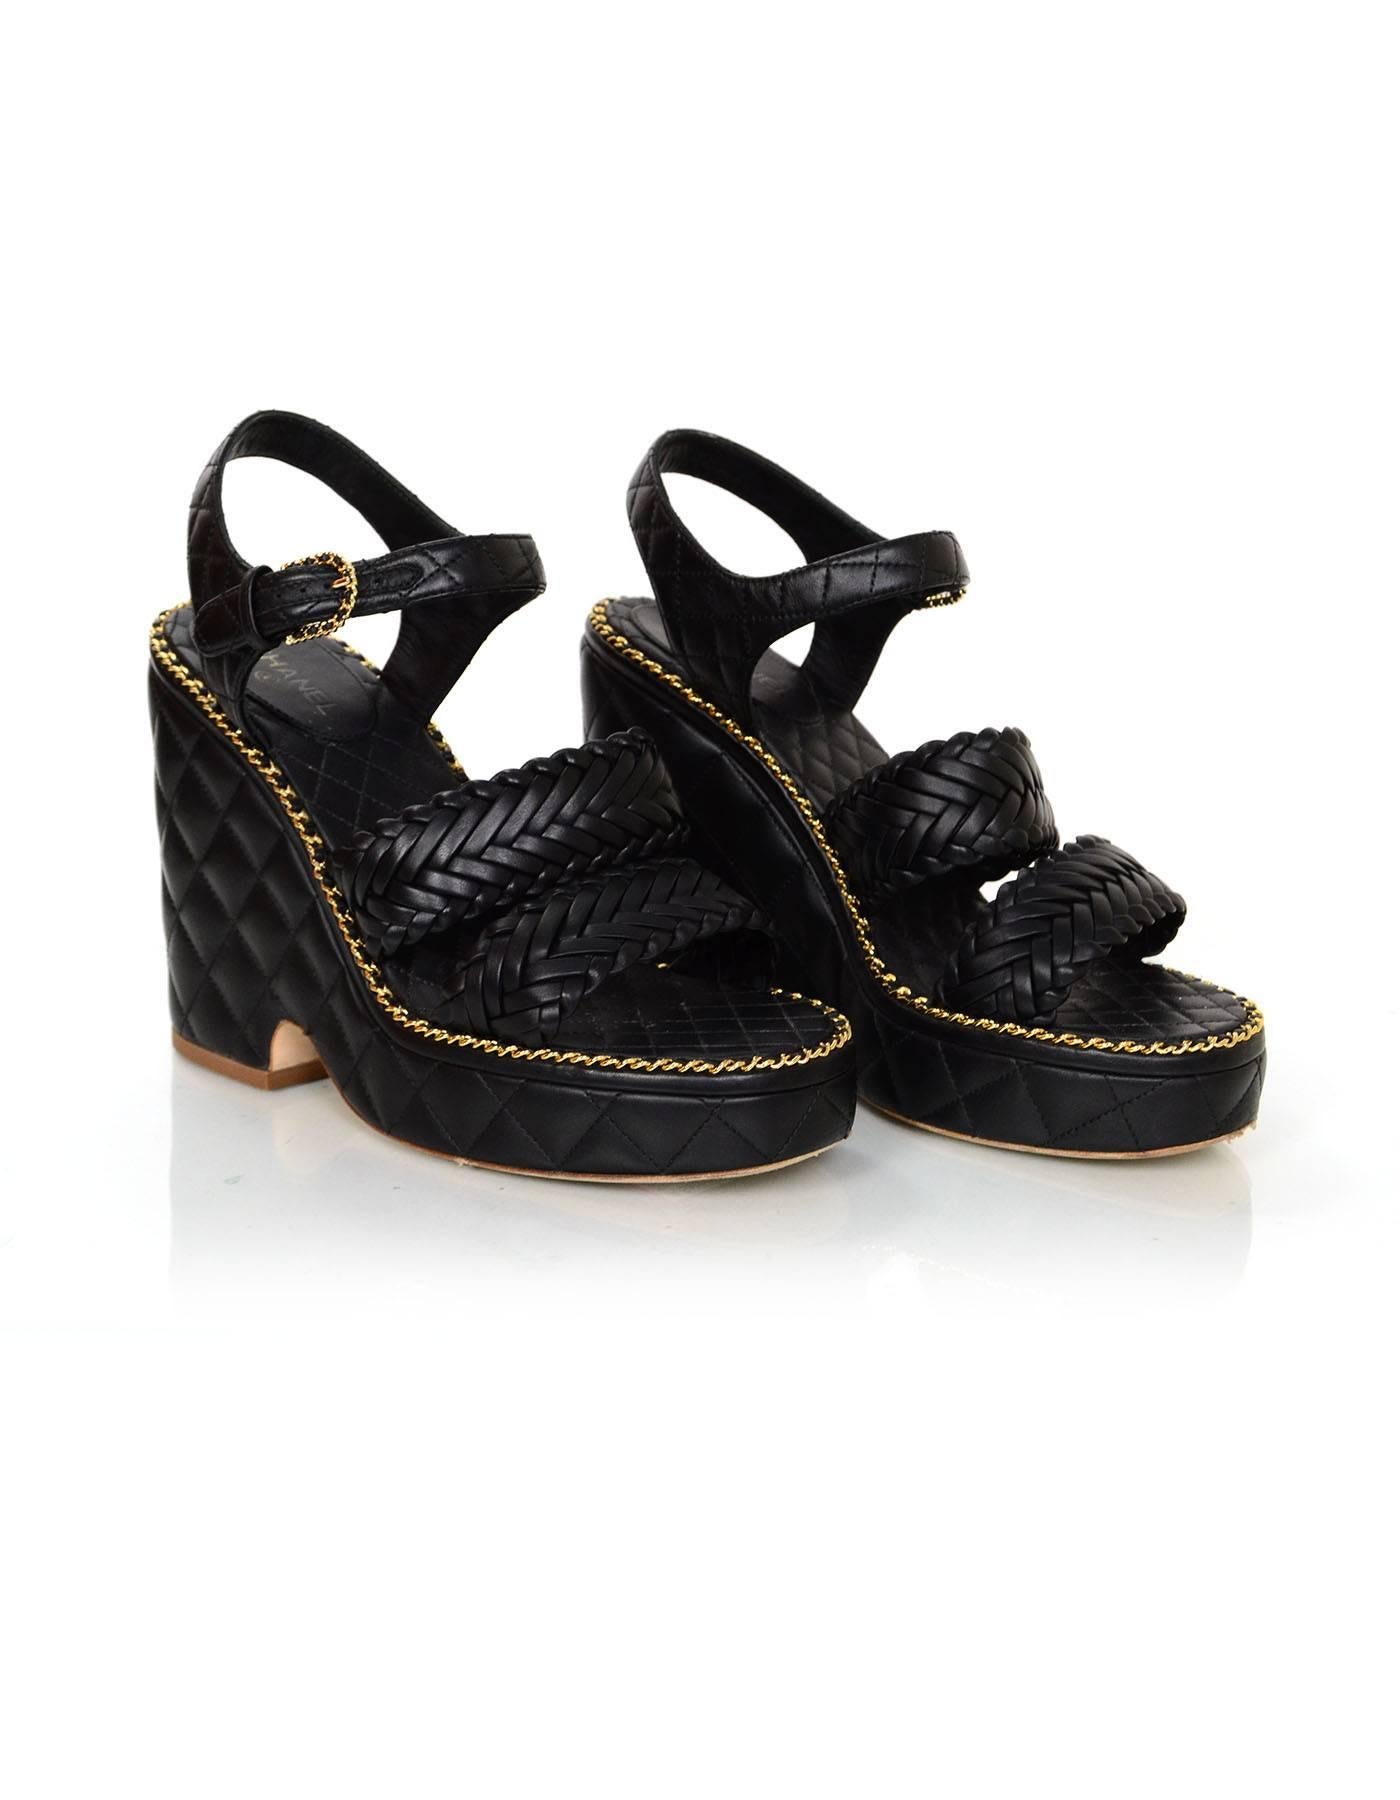 Chanel Black Quilted Platform Sandals Sz 38.5 rt. $1, 550 In Excellent Condition In New York, NY